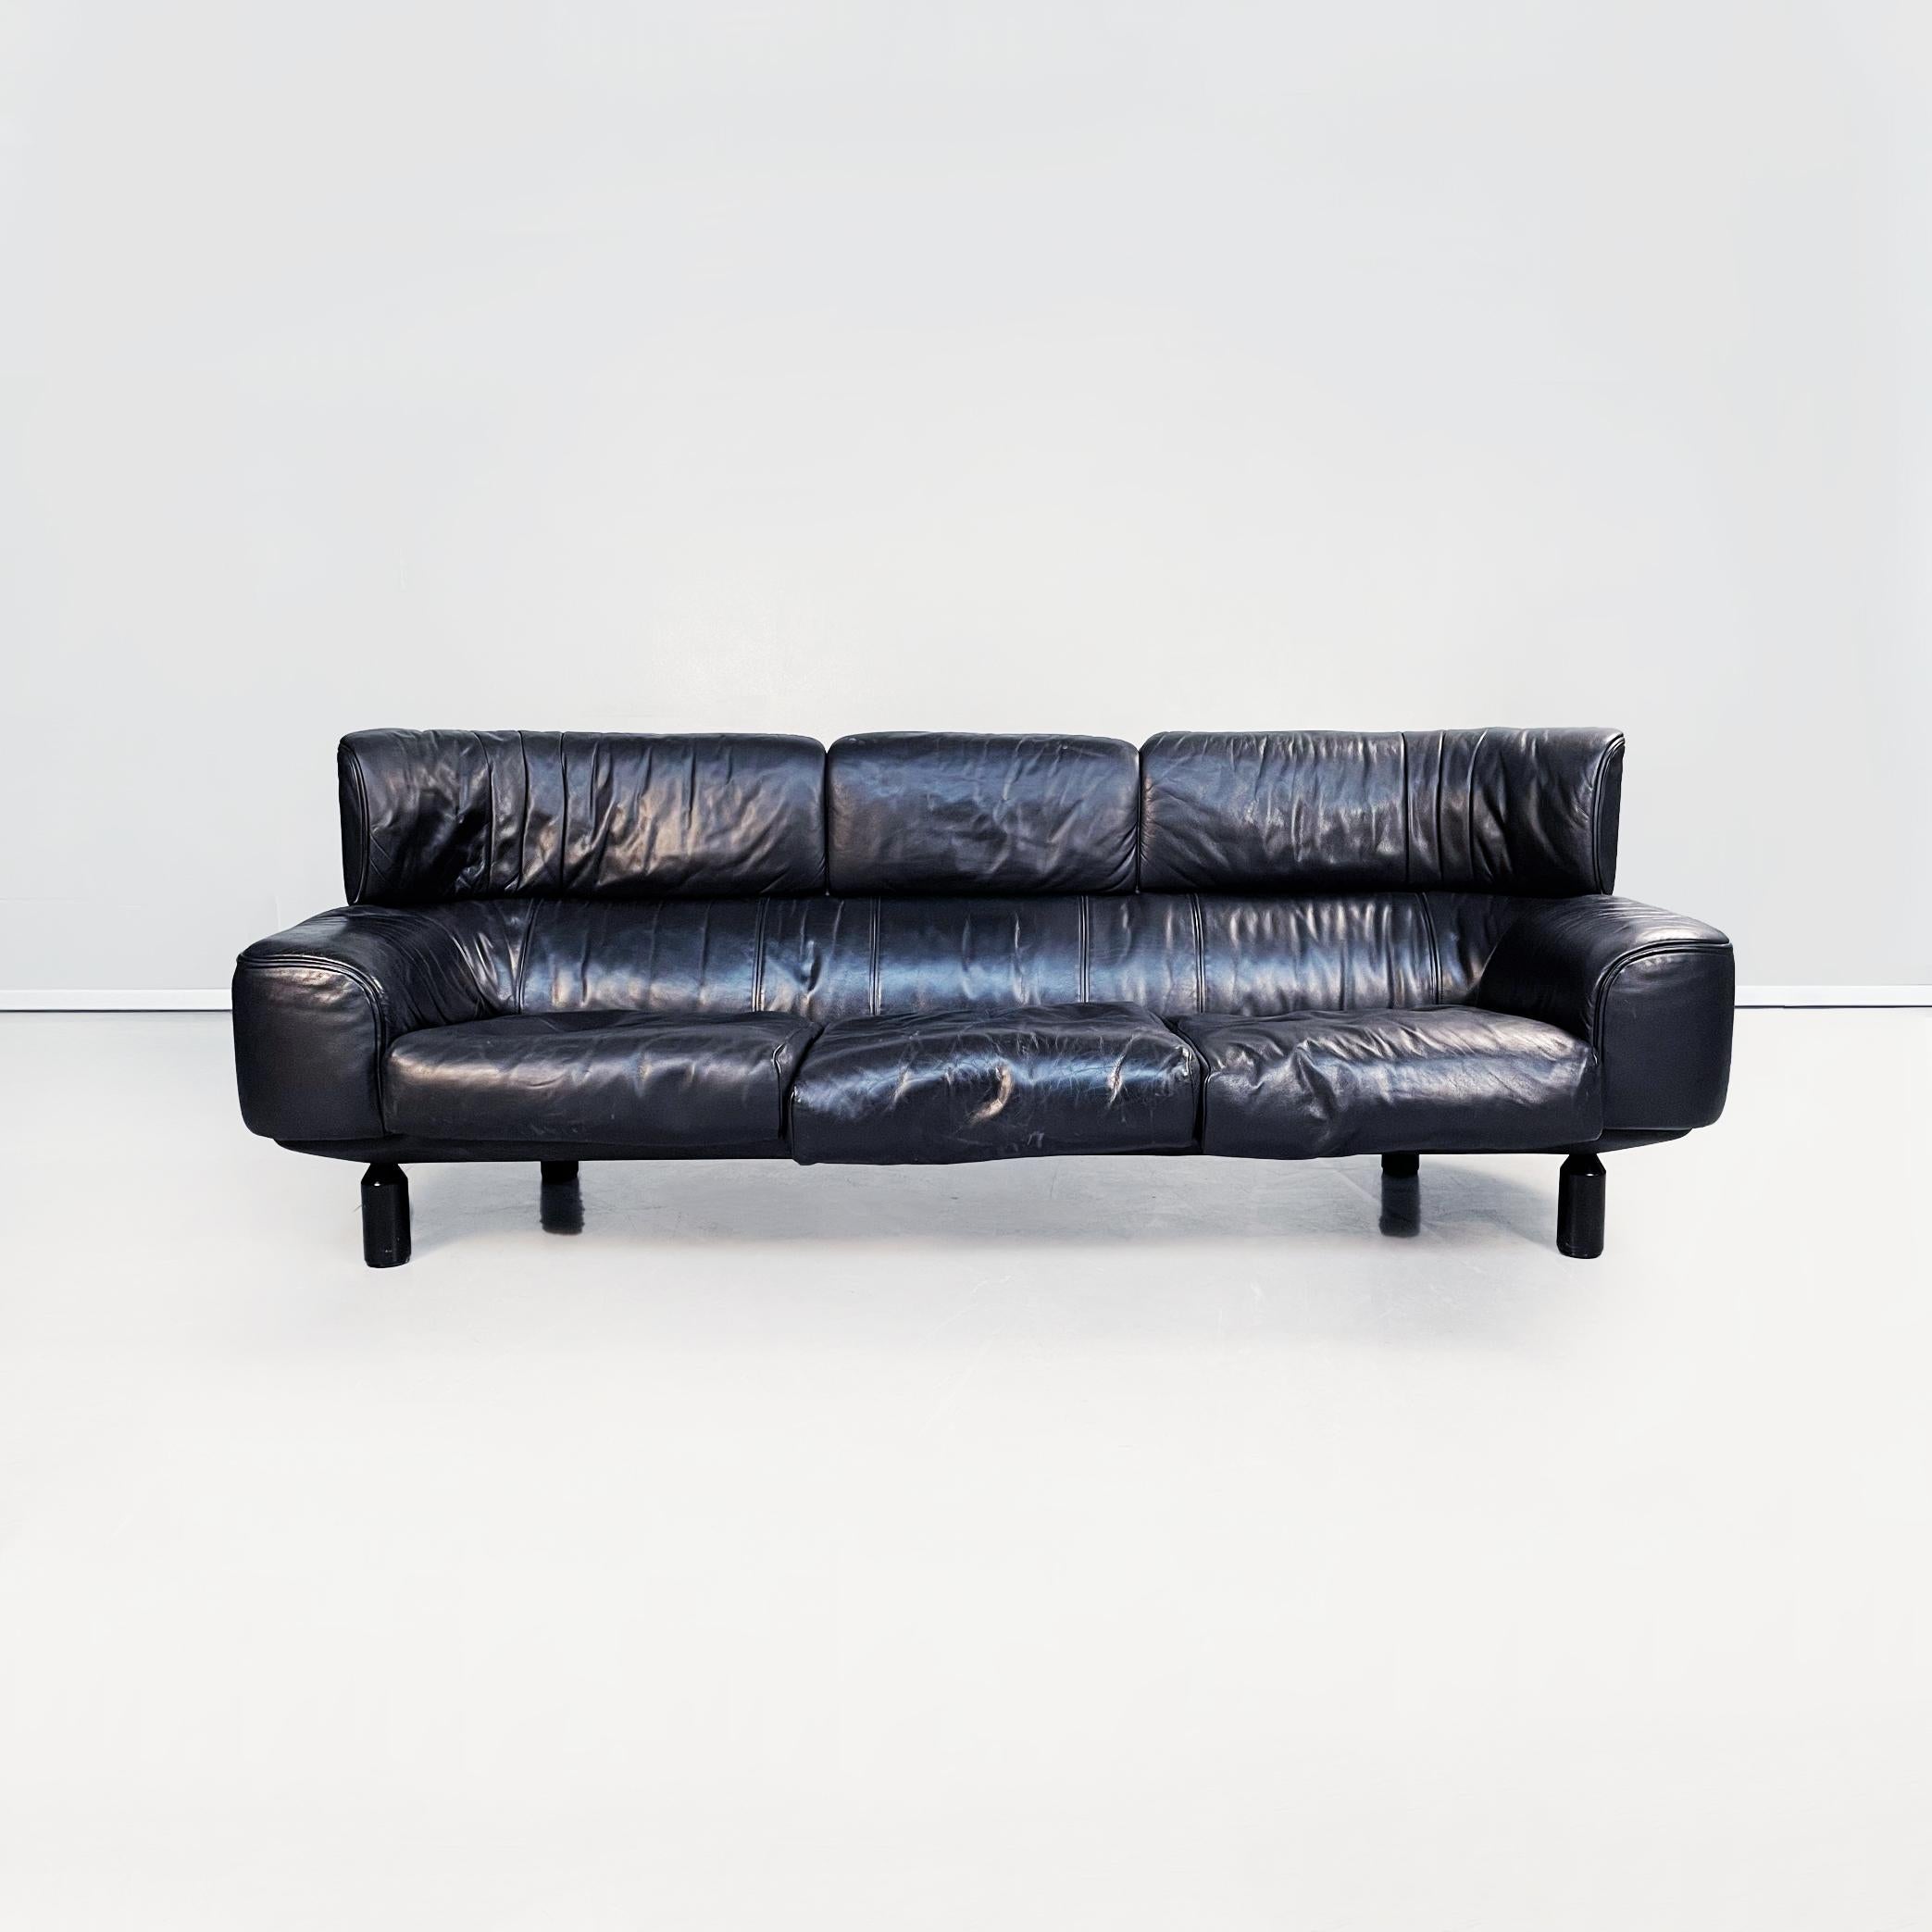 Italian modern Black leather Sofas and armchair Bull by Frattini for Cassina, 1980s
Set of a 3-seater sofa, a 2-seater sofa and armchair, which are Bull model. All three have the same structure. The rectangular seat is made up of padded cushions